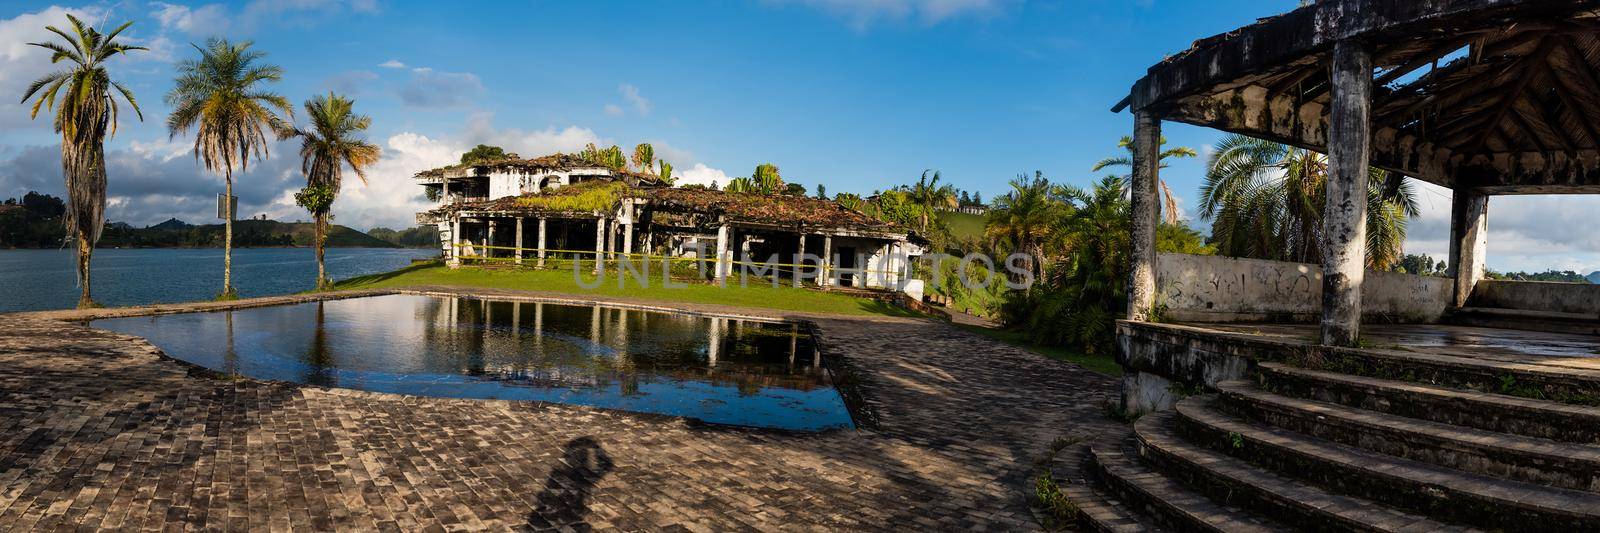 Guatape, Colombia - December 12, 2017: Pablo Escobar's old estate La Manuela in ruin with palm trees pool and river in view. Panoramic view